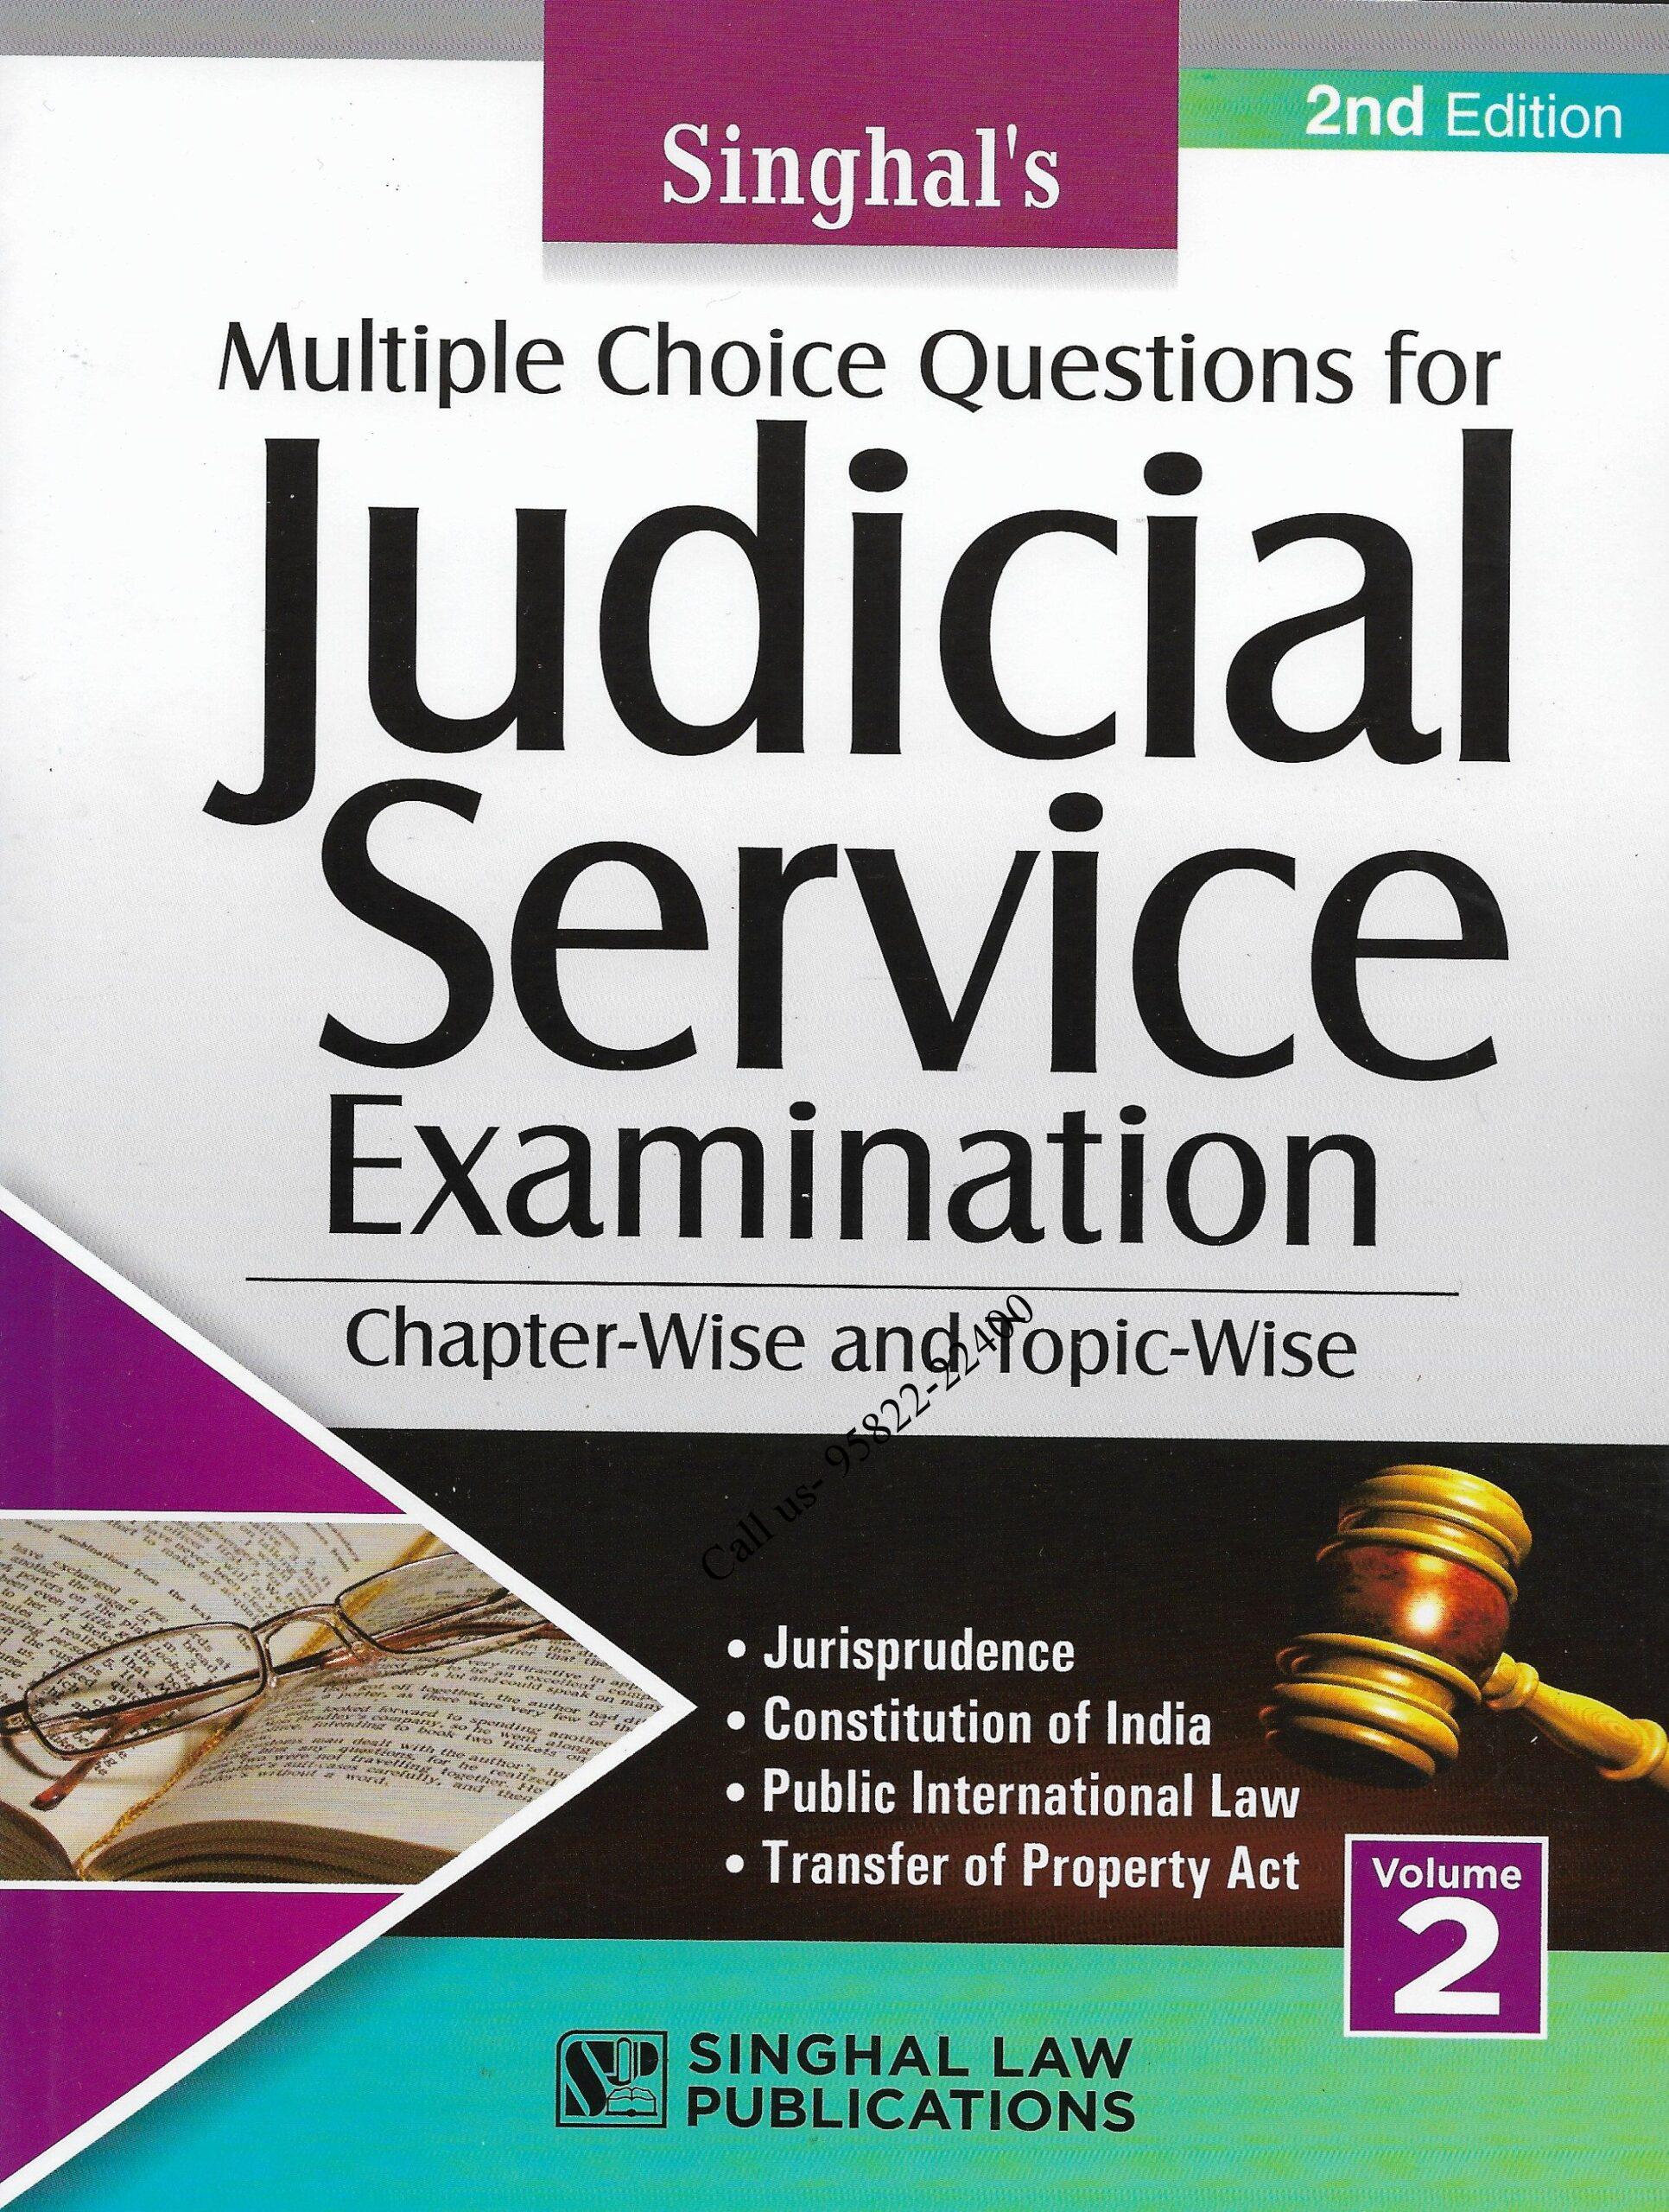 Singhal's Multiple Choice Questions for JUDICIAL SERVICE EXAMINATION (VOLUME 1)Multiple Choice Questions for JUDICIAL SERVICE EXAMINATION (VOLUME 2) Cover page